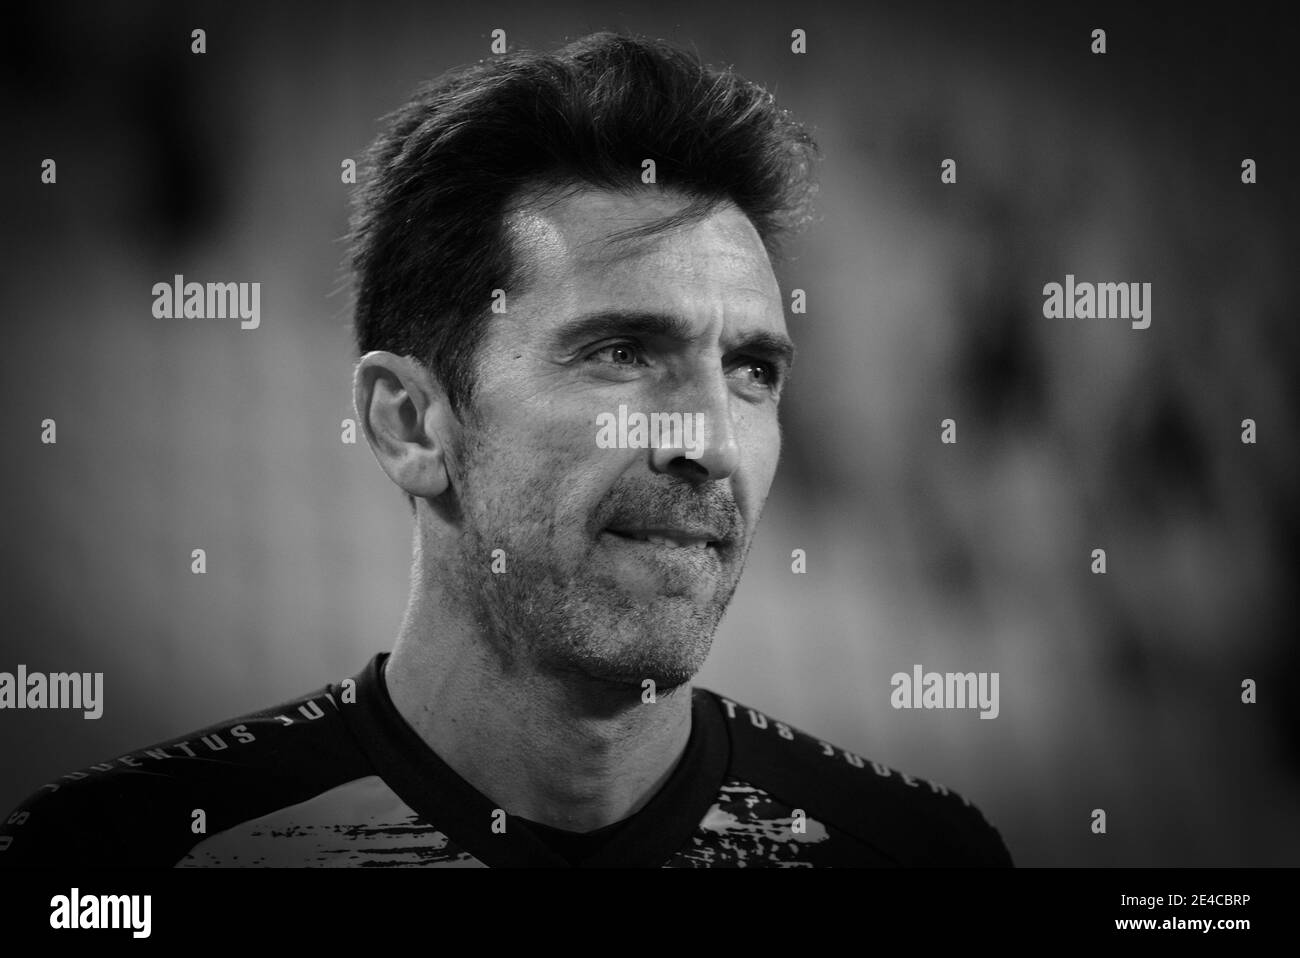 Portrait of Gianluigi Buffon in black and white during the warm-up at the Allianz Stadium Stock Photo